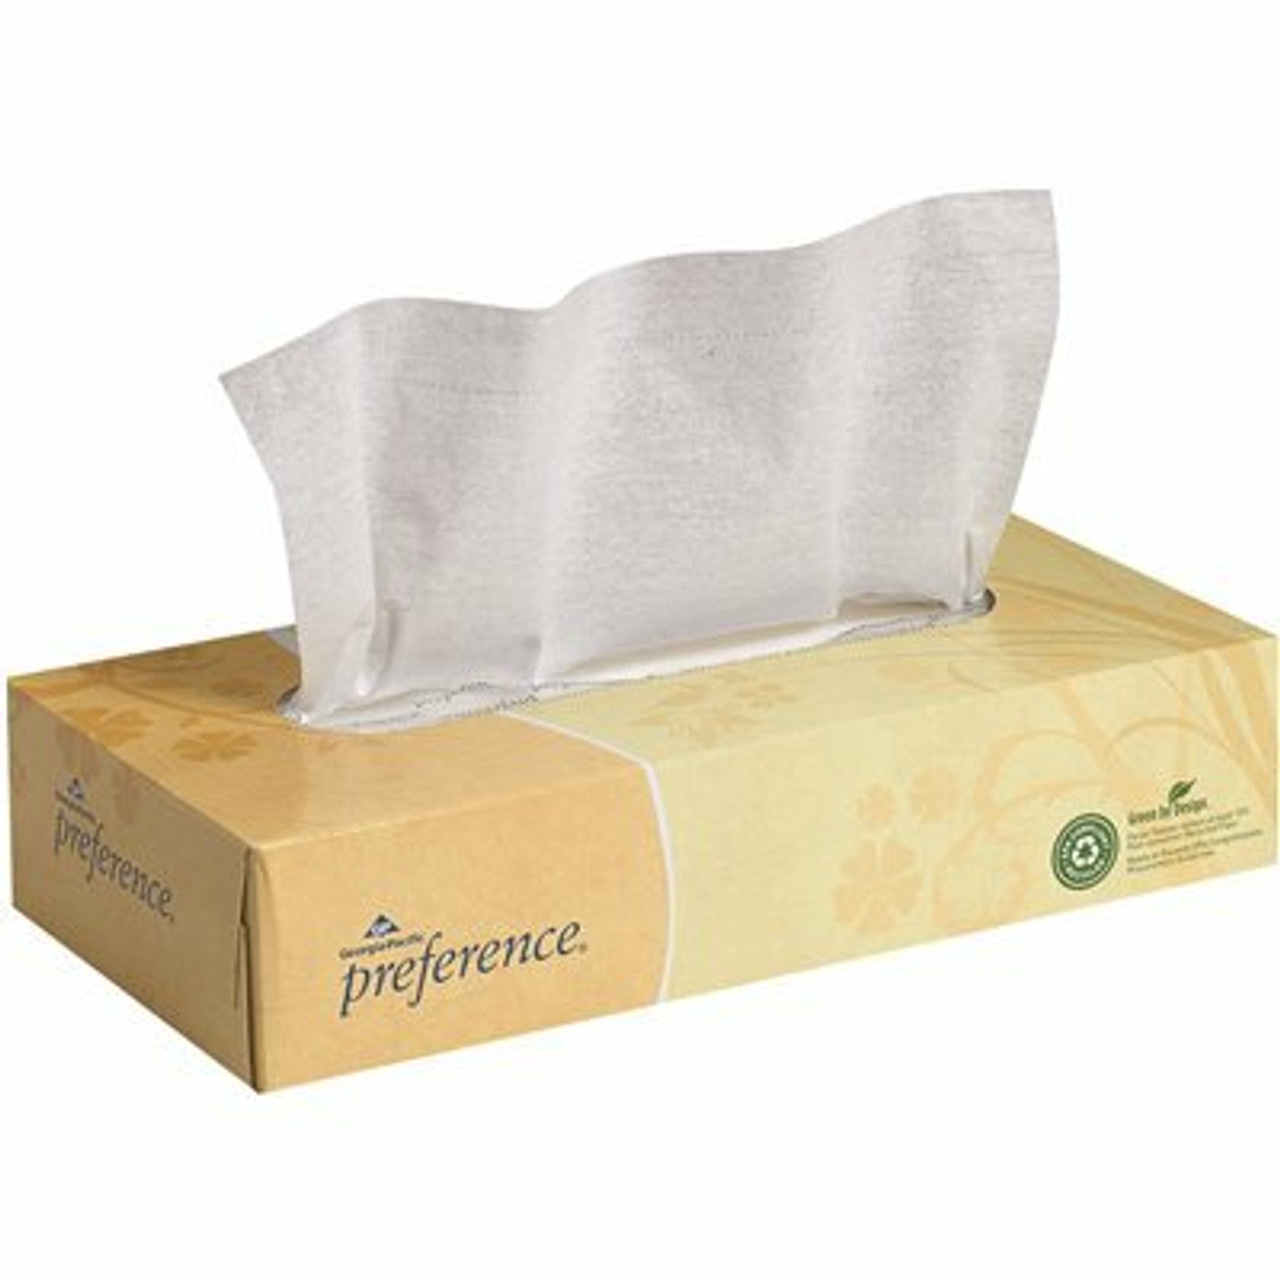 Preference 2-Ply Flat Box Facial Tissue (100-Count)